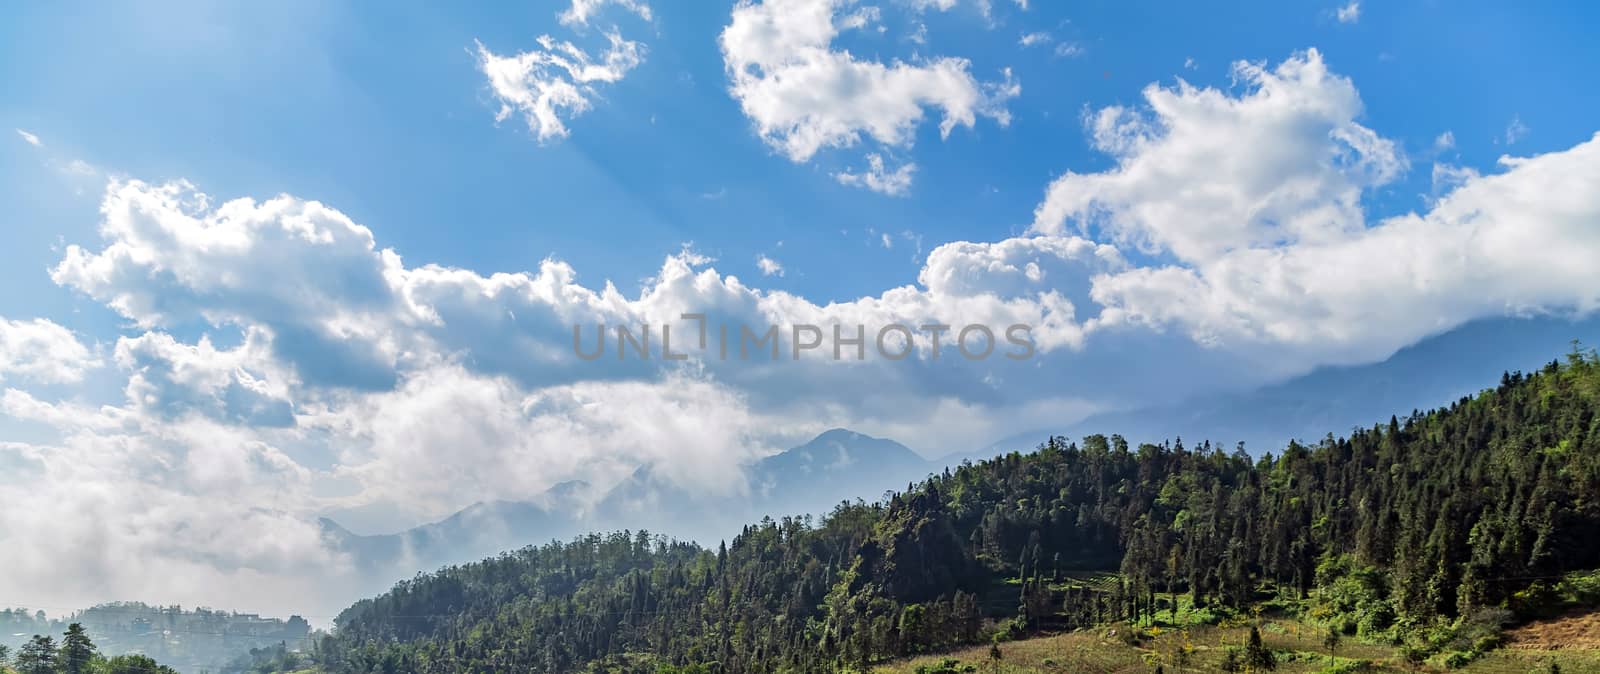 landscape in the mountains at sunset. blue cloudy sky scene.